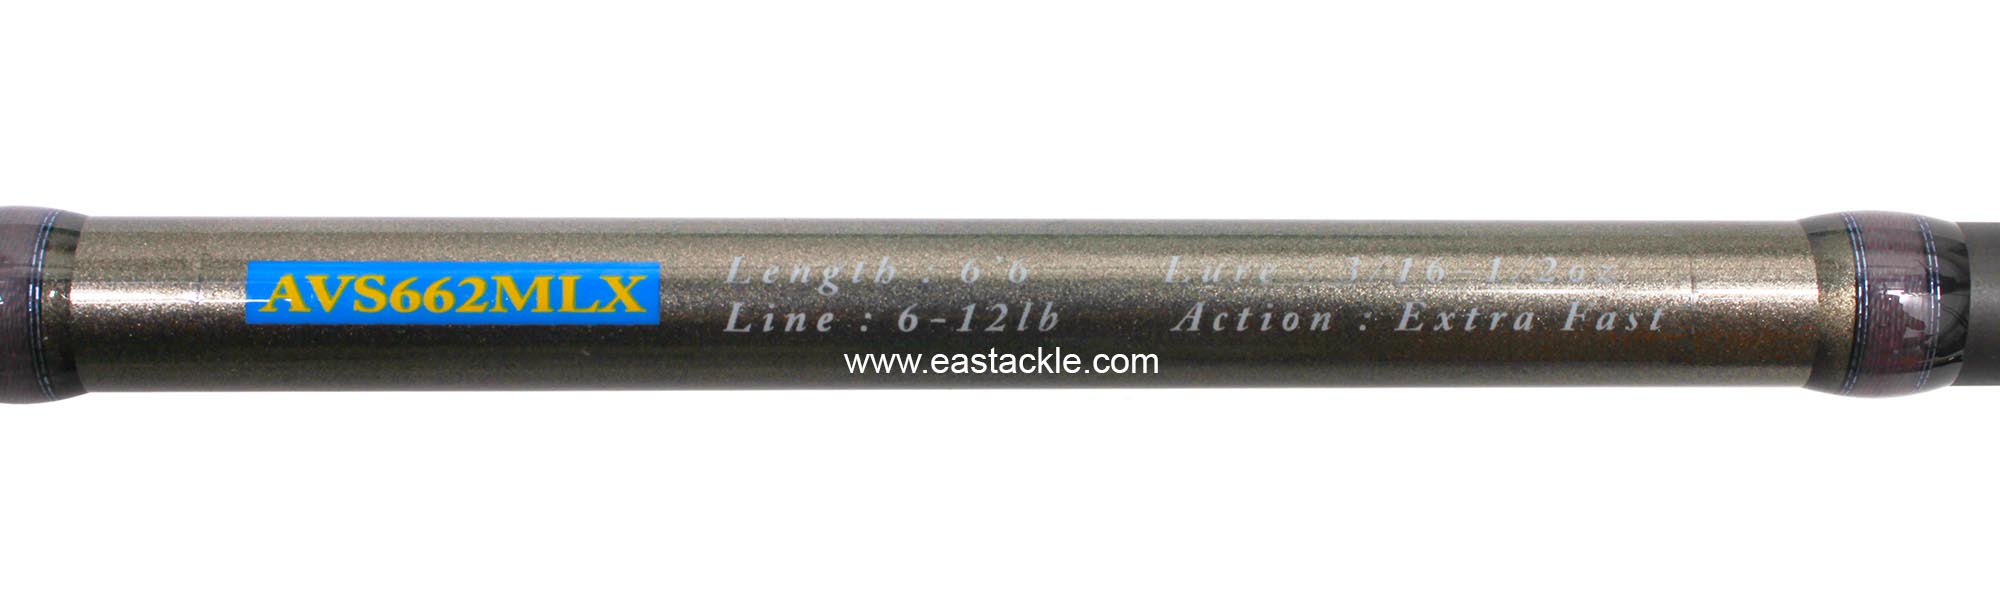 Storm - Adventure - AVS662MLX - Spinning Rod - Blank Specifications | Eastackle